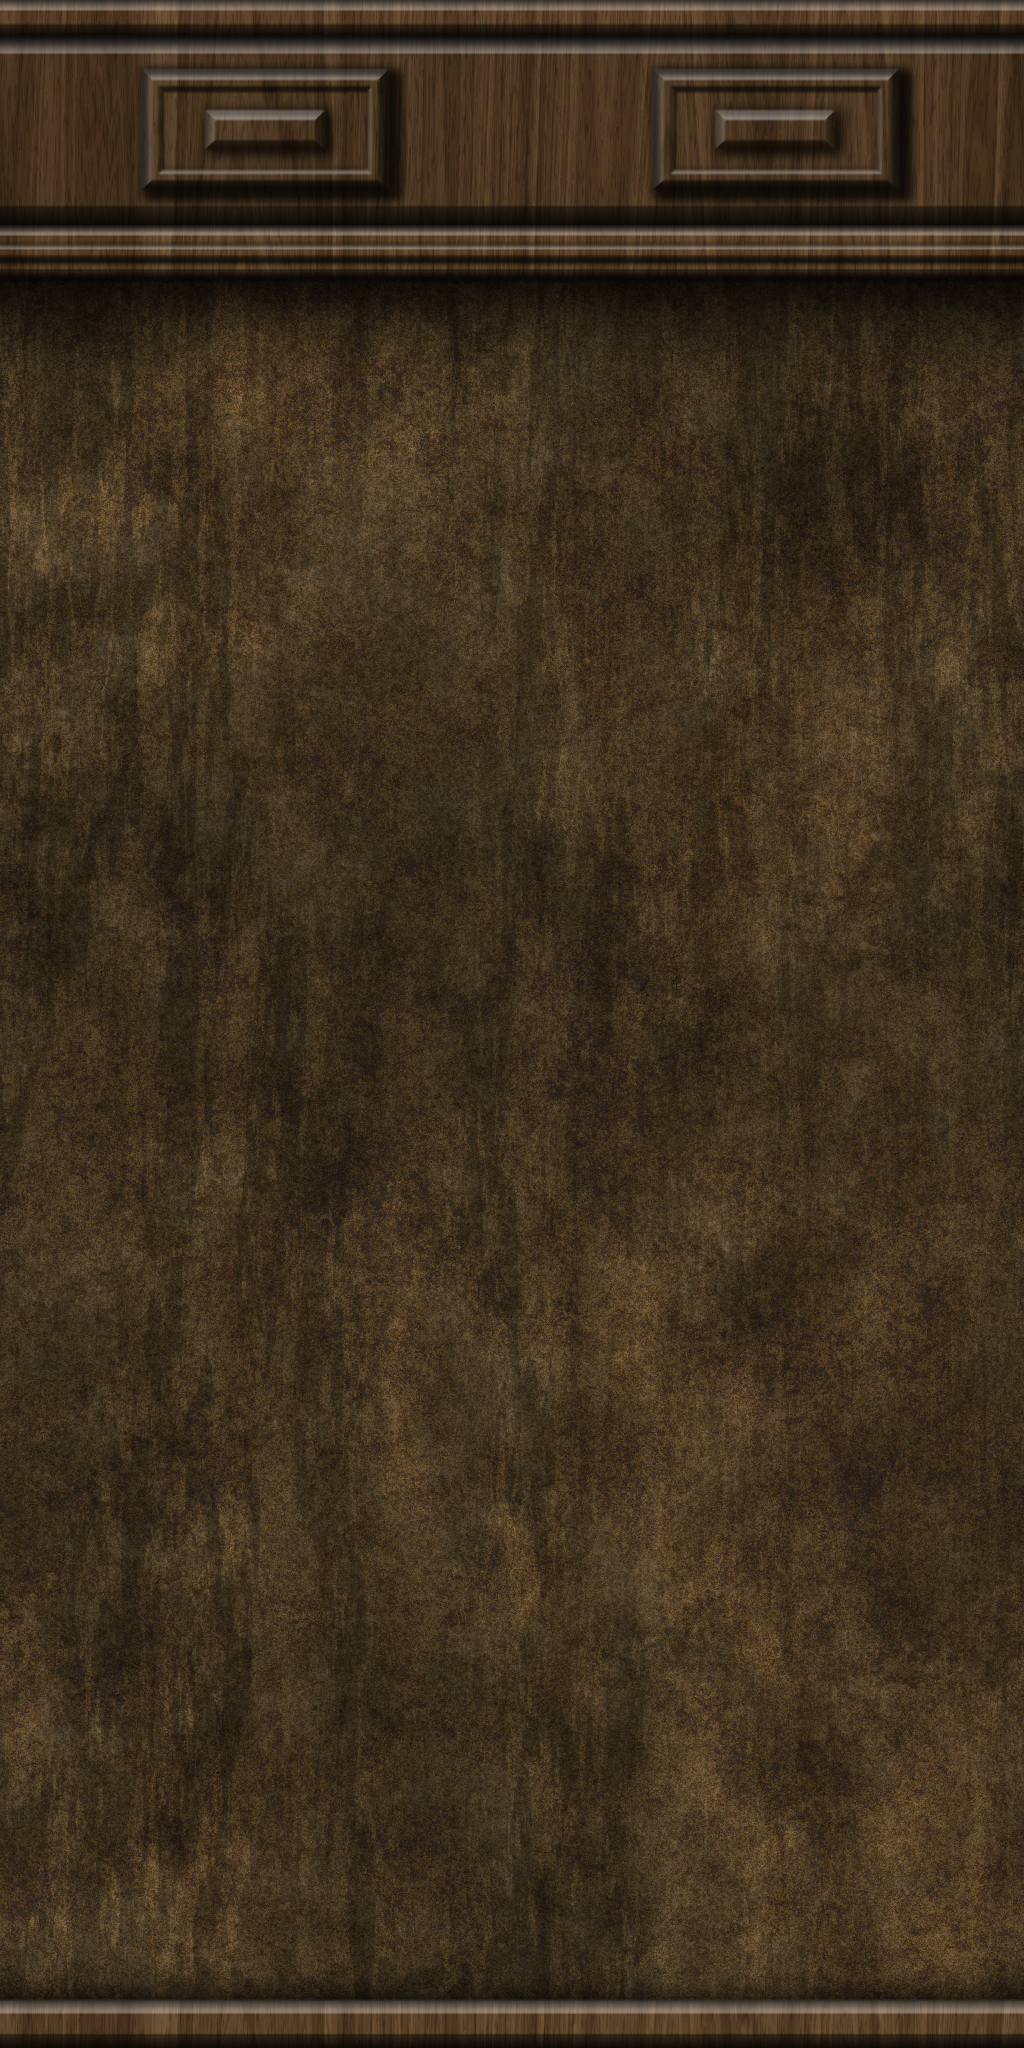 wood_panel_wall_01_by_hoover1979-dblokya.png